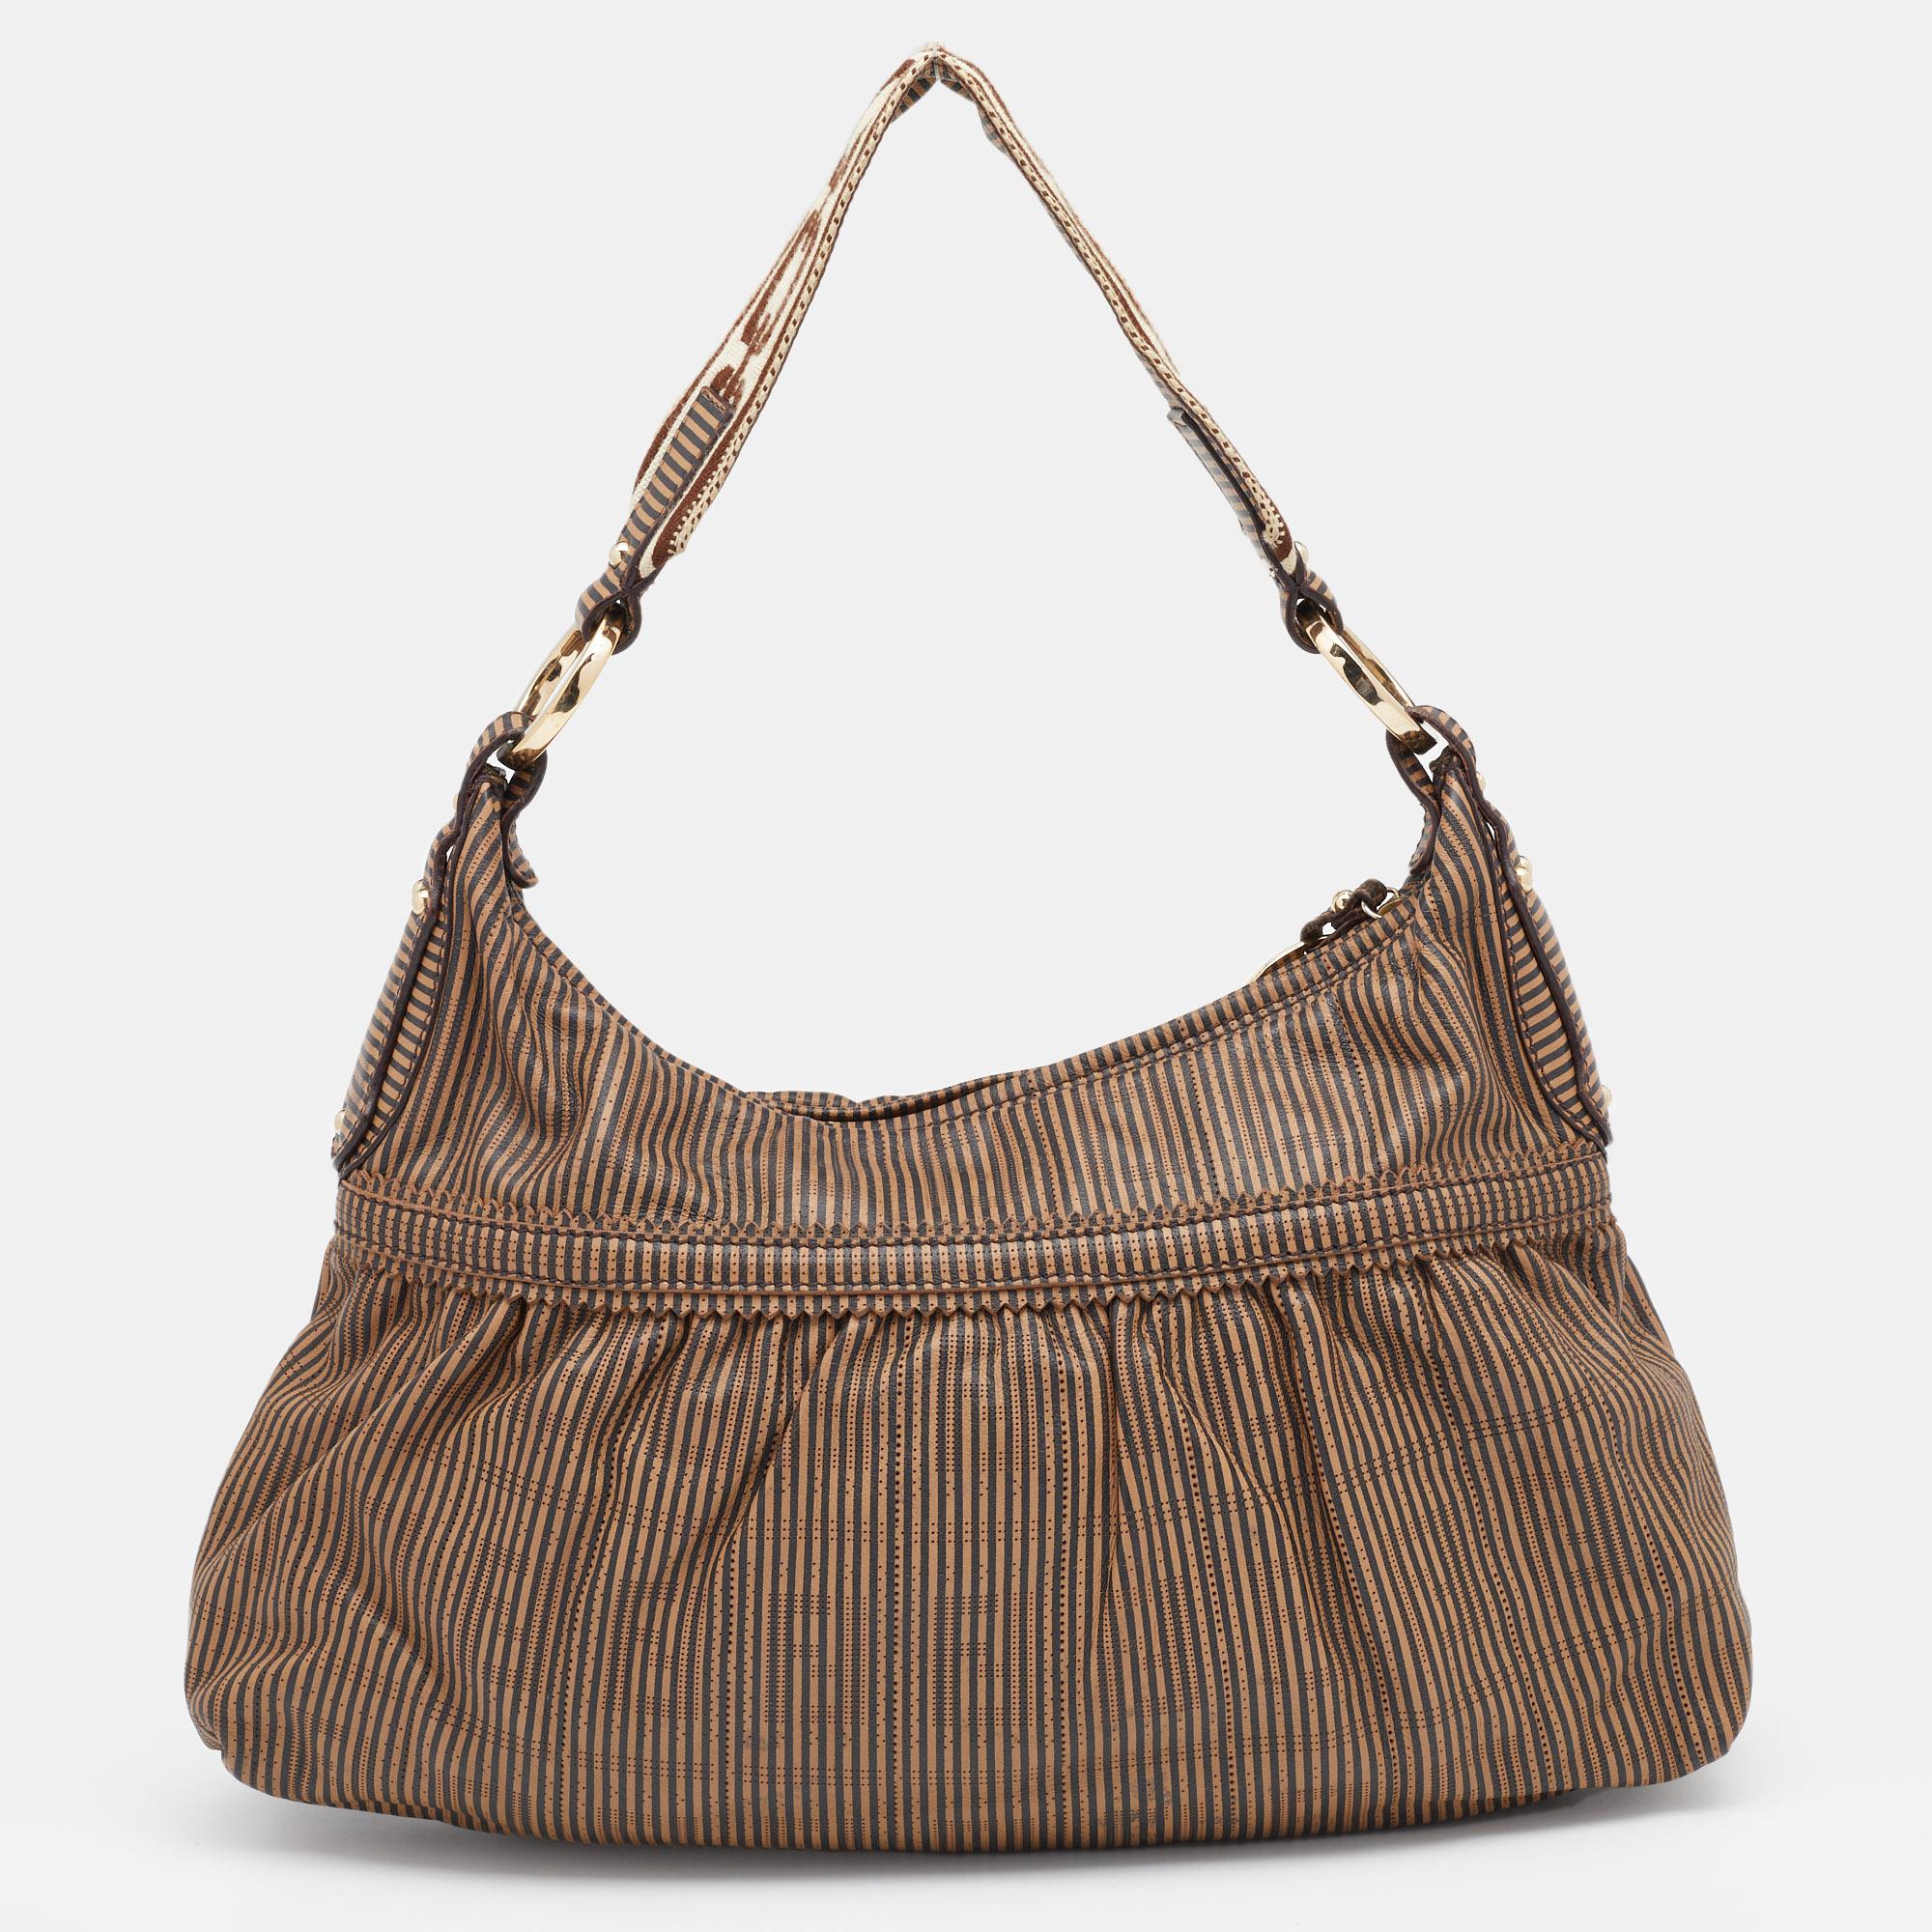 With pleat detailing, this Fendi Chef hobo has an attractive silhouette. Created from signature leather with perforations, it features a single top handle, stripe detailing, and a fabric-lined interior. The zipper closure at the top is equipped with